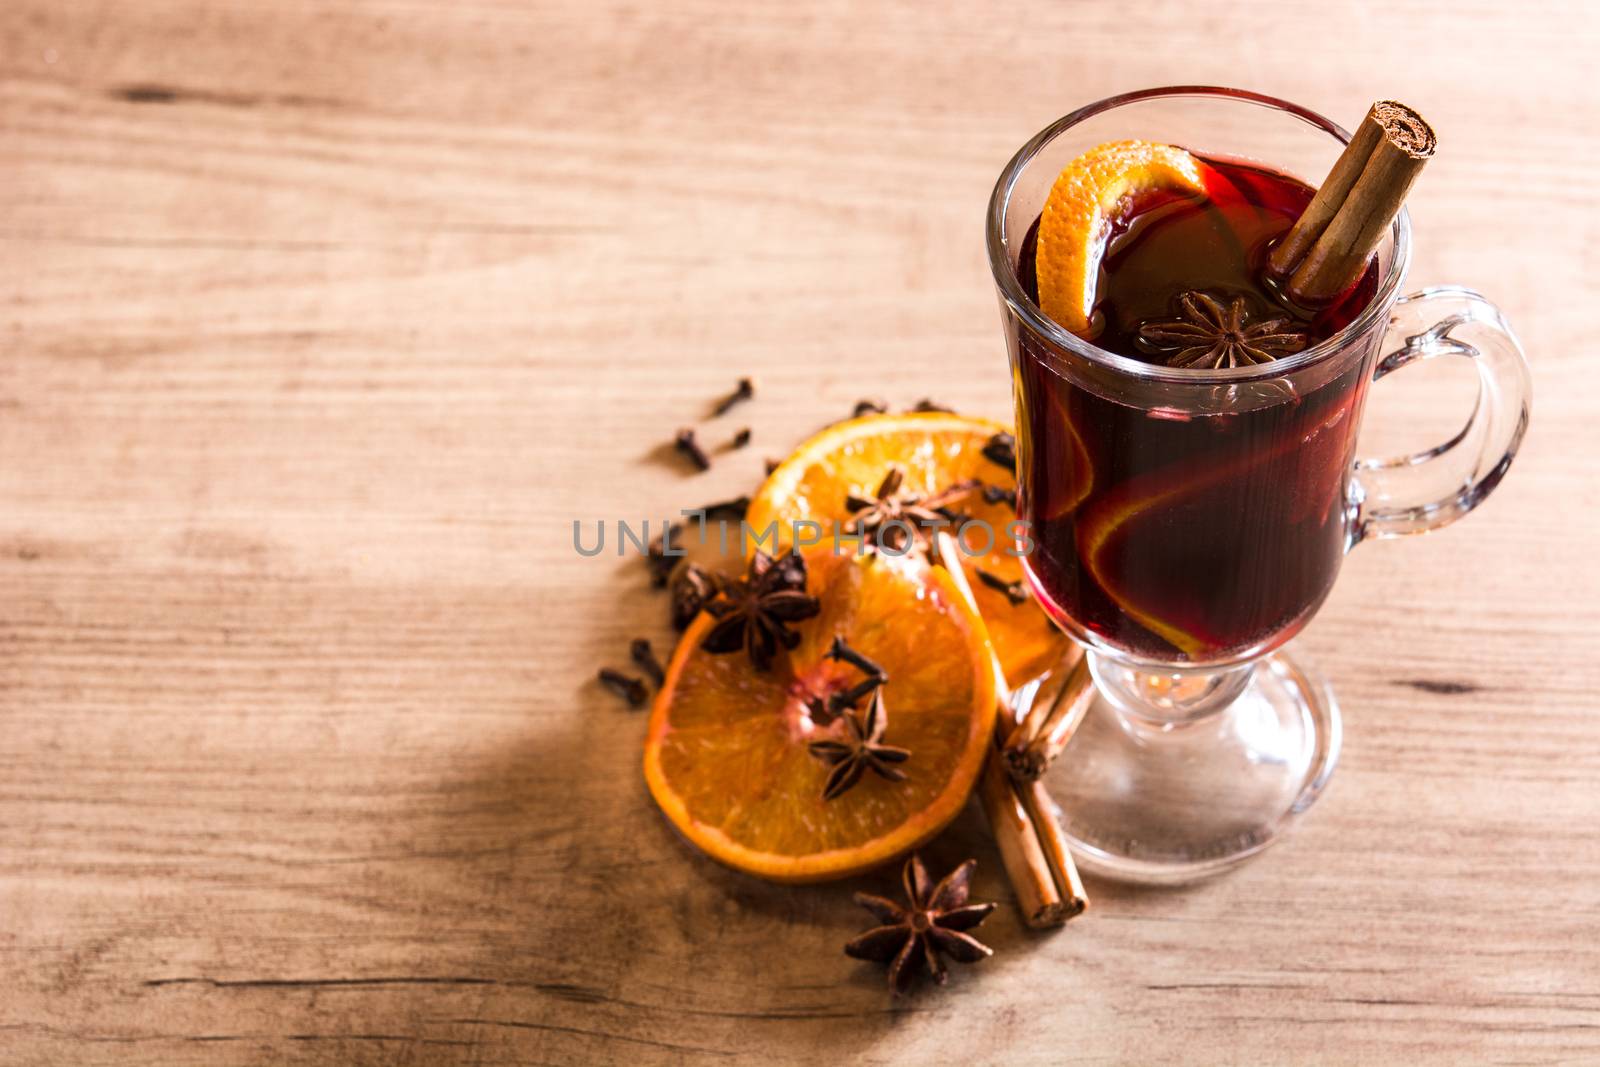 Mulled wine in glass with spice and fruit on wooden table. by chandlervid85